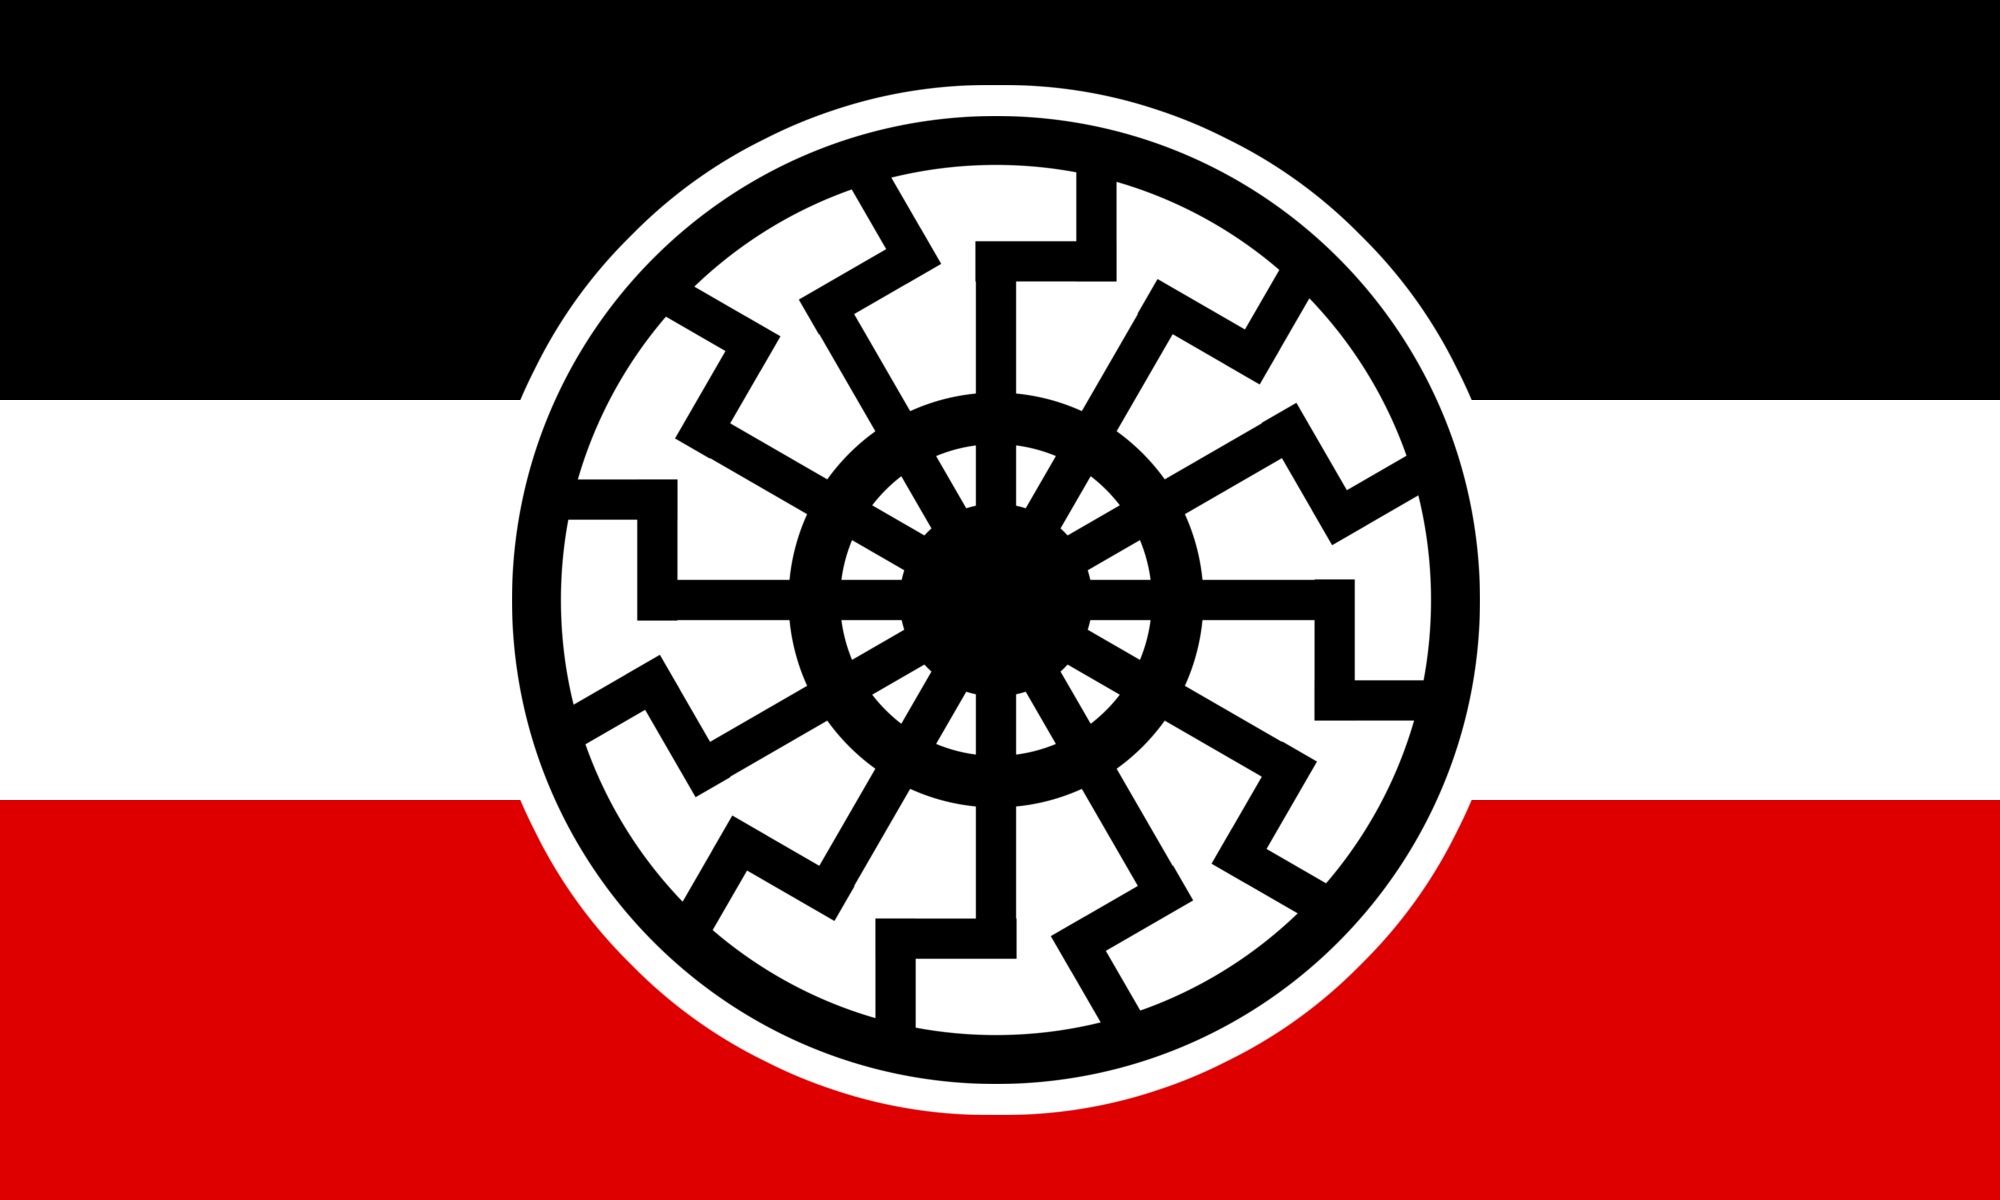 Imperial Nationalist Party logo